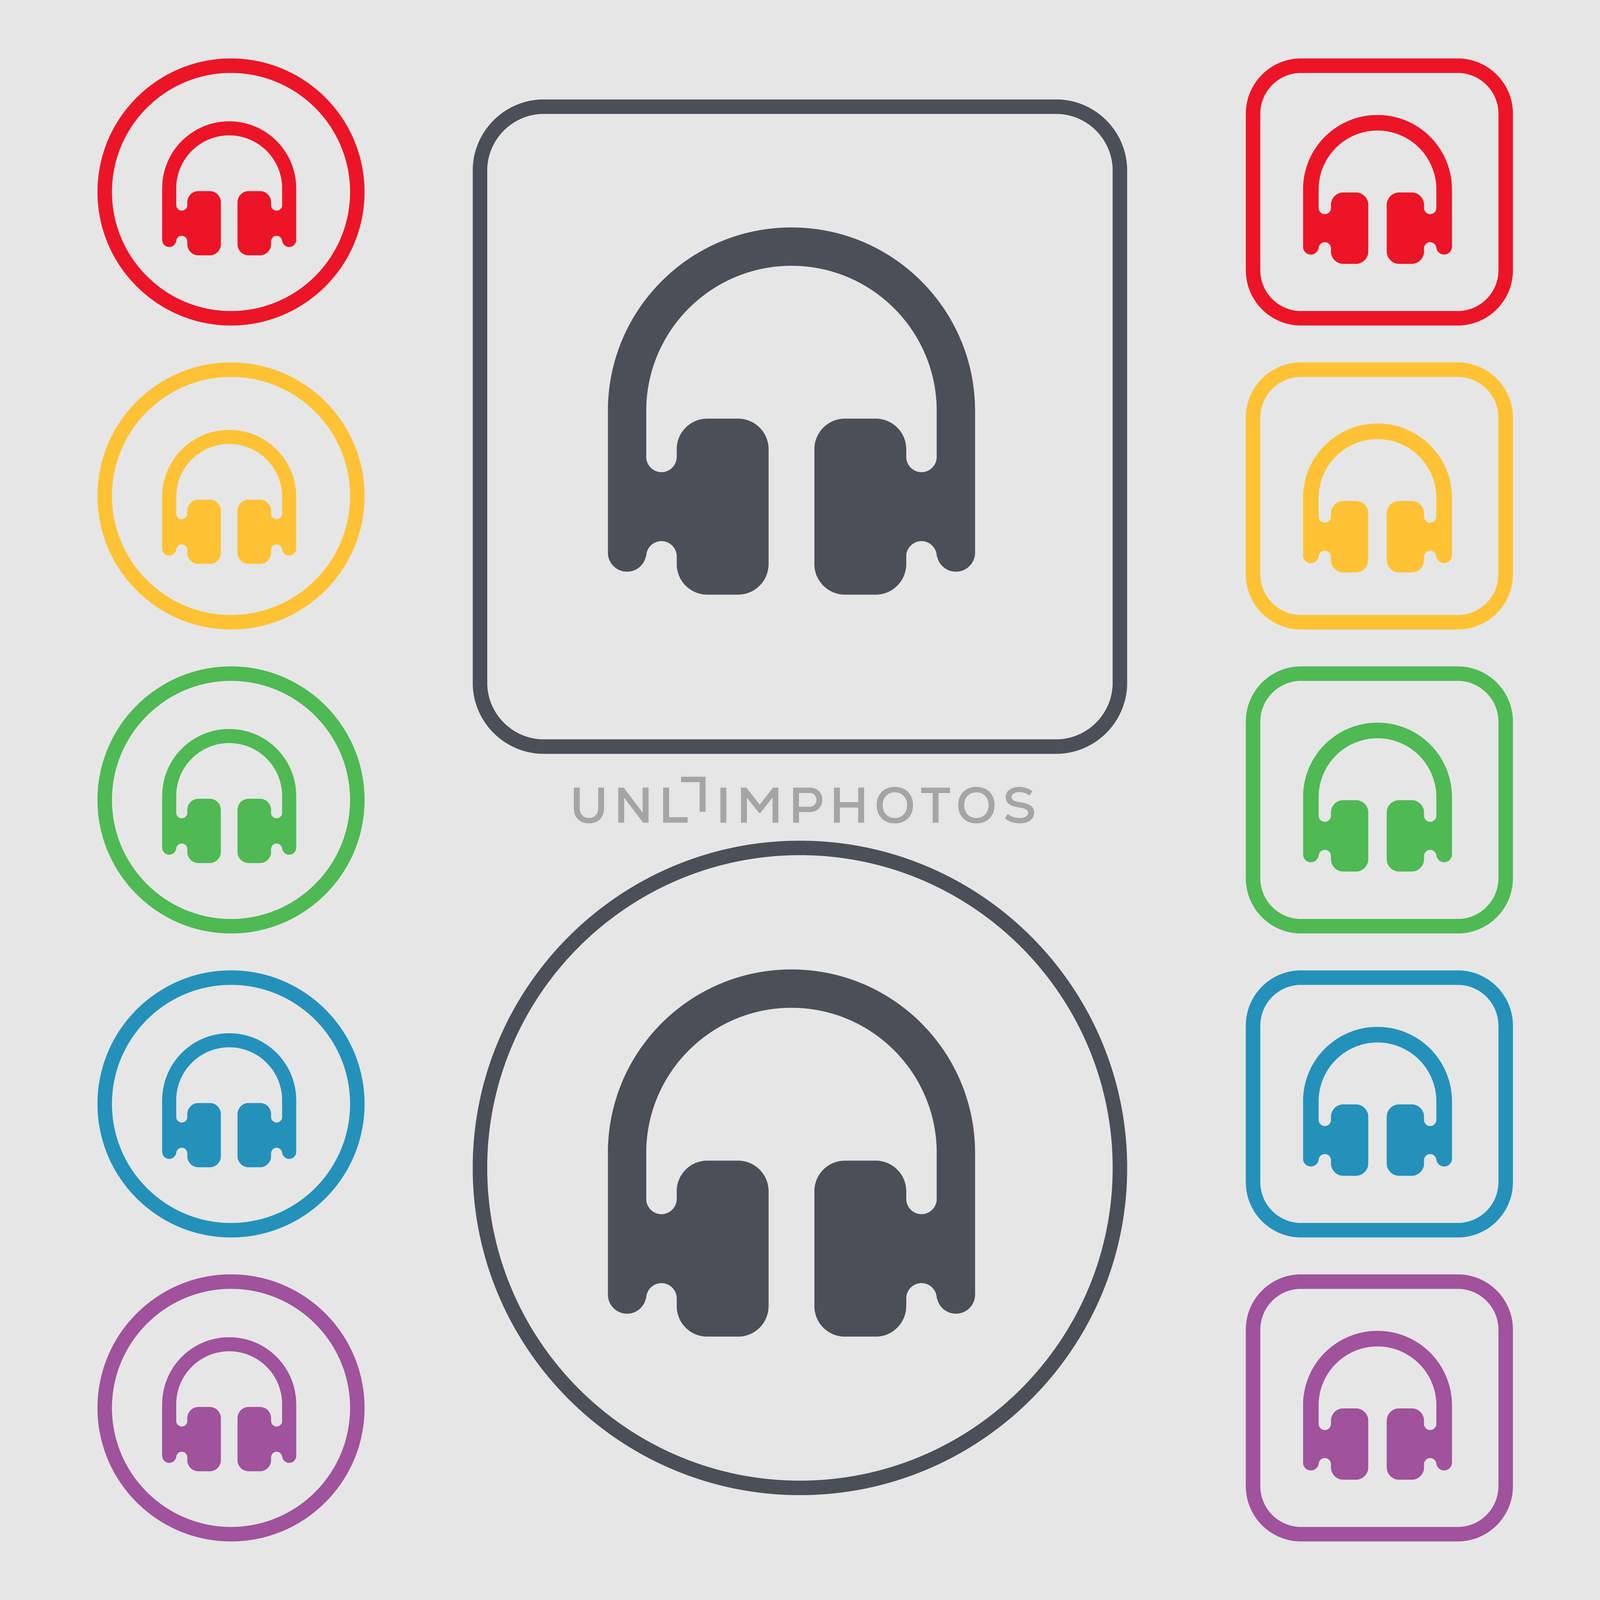 Headphones, Earphones icon sign. symbol on the Round and square buttons with frame. illustration